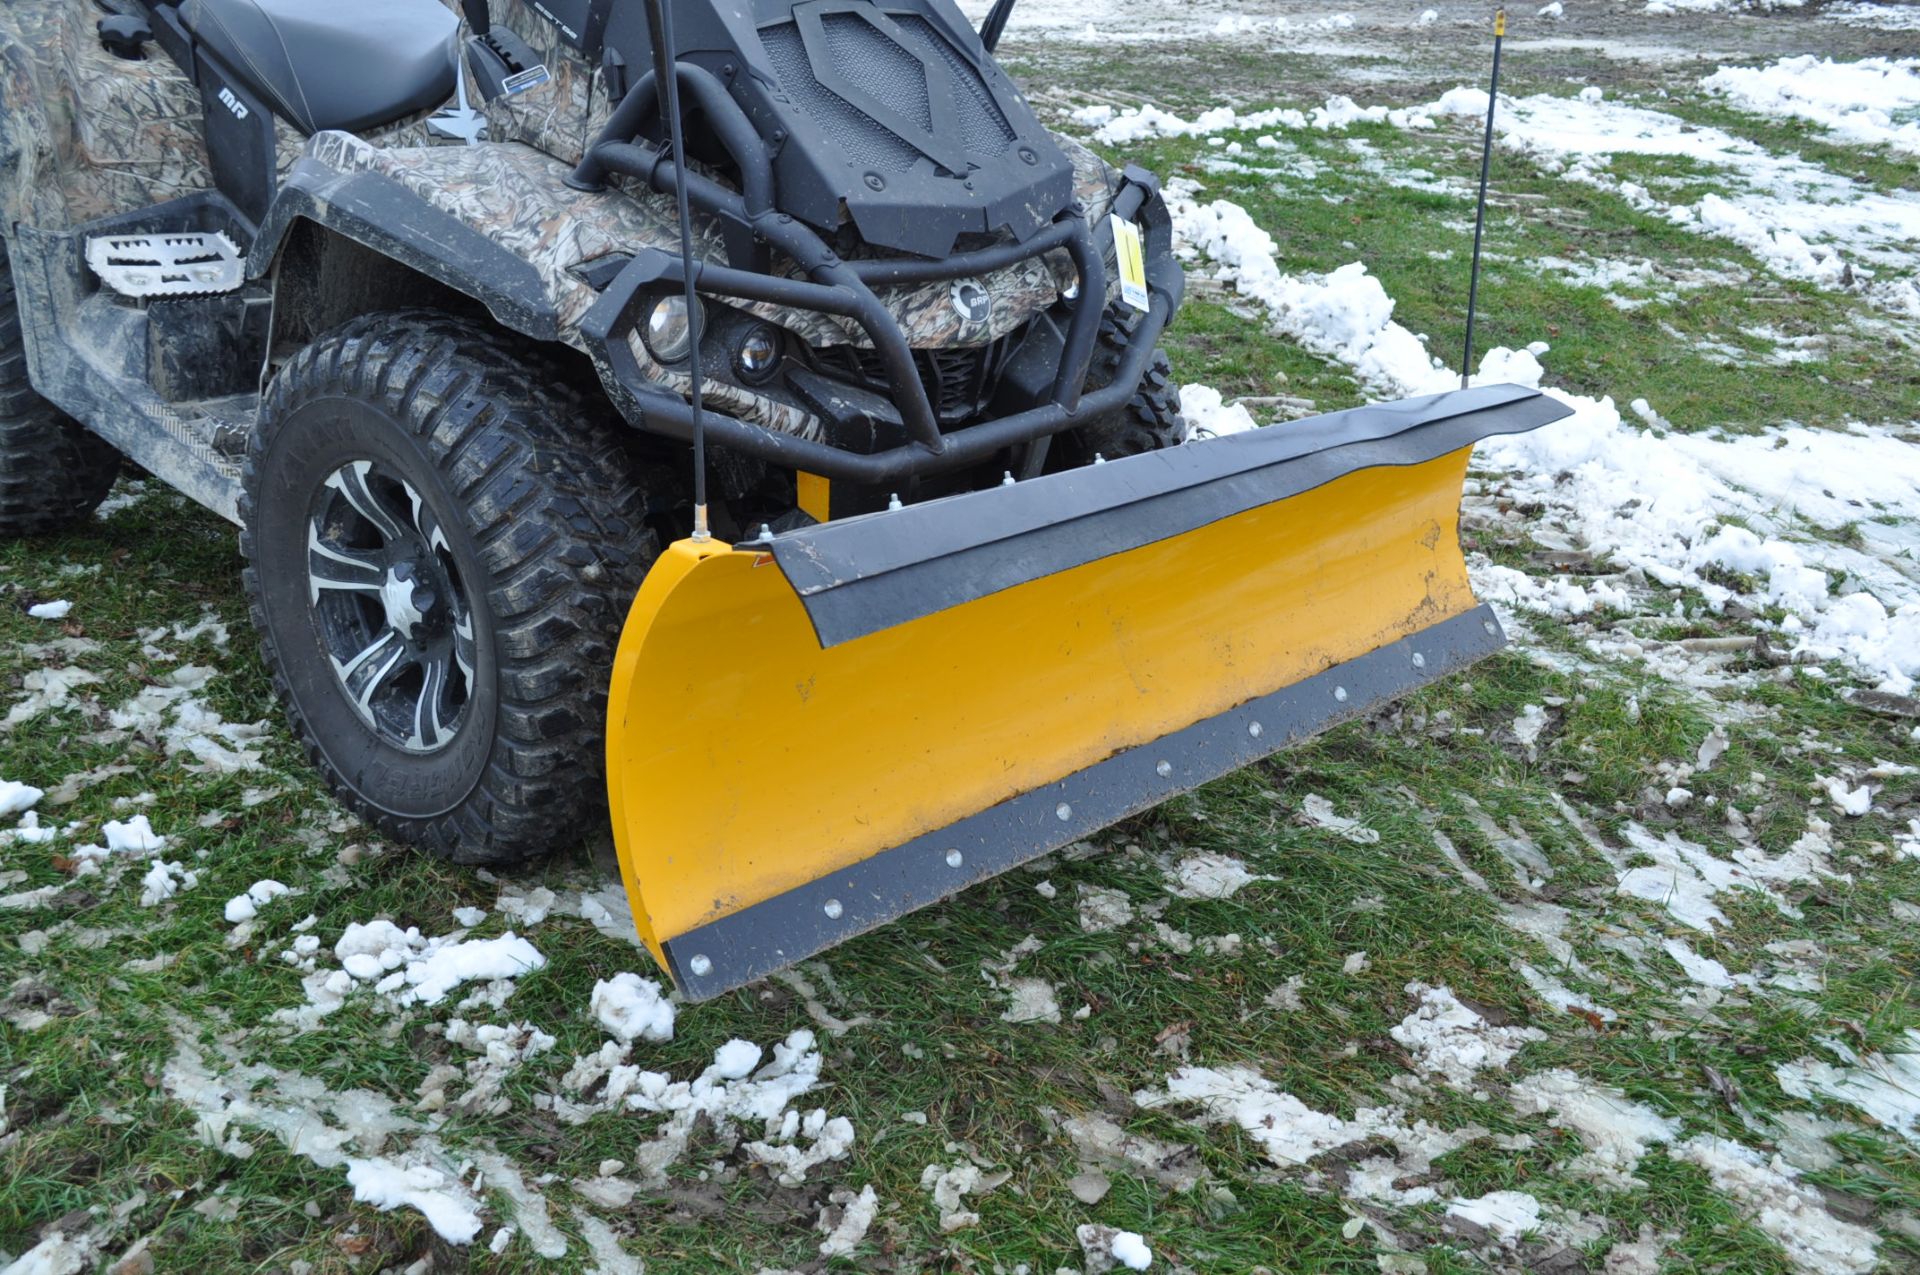 2013 Can-am Outlander 1000 X MR ATV, elec winch Model 5KDF, sells with snow plow, AT 30 x 10 R 14 - Image 9 of 19